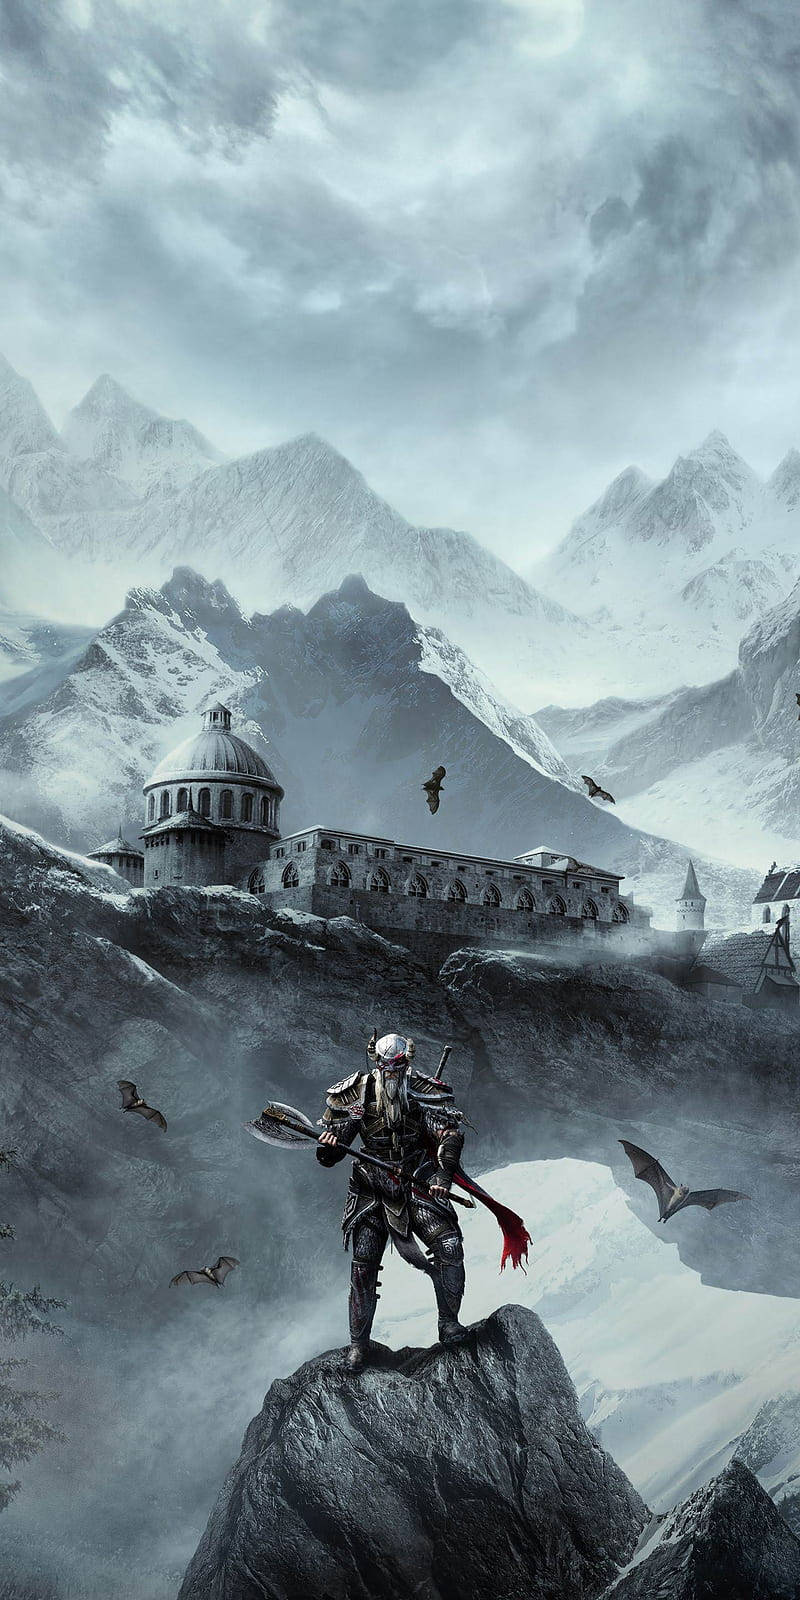 Get ready to explore the world of Skyrim with the new Skyrim Phone Wallpaper